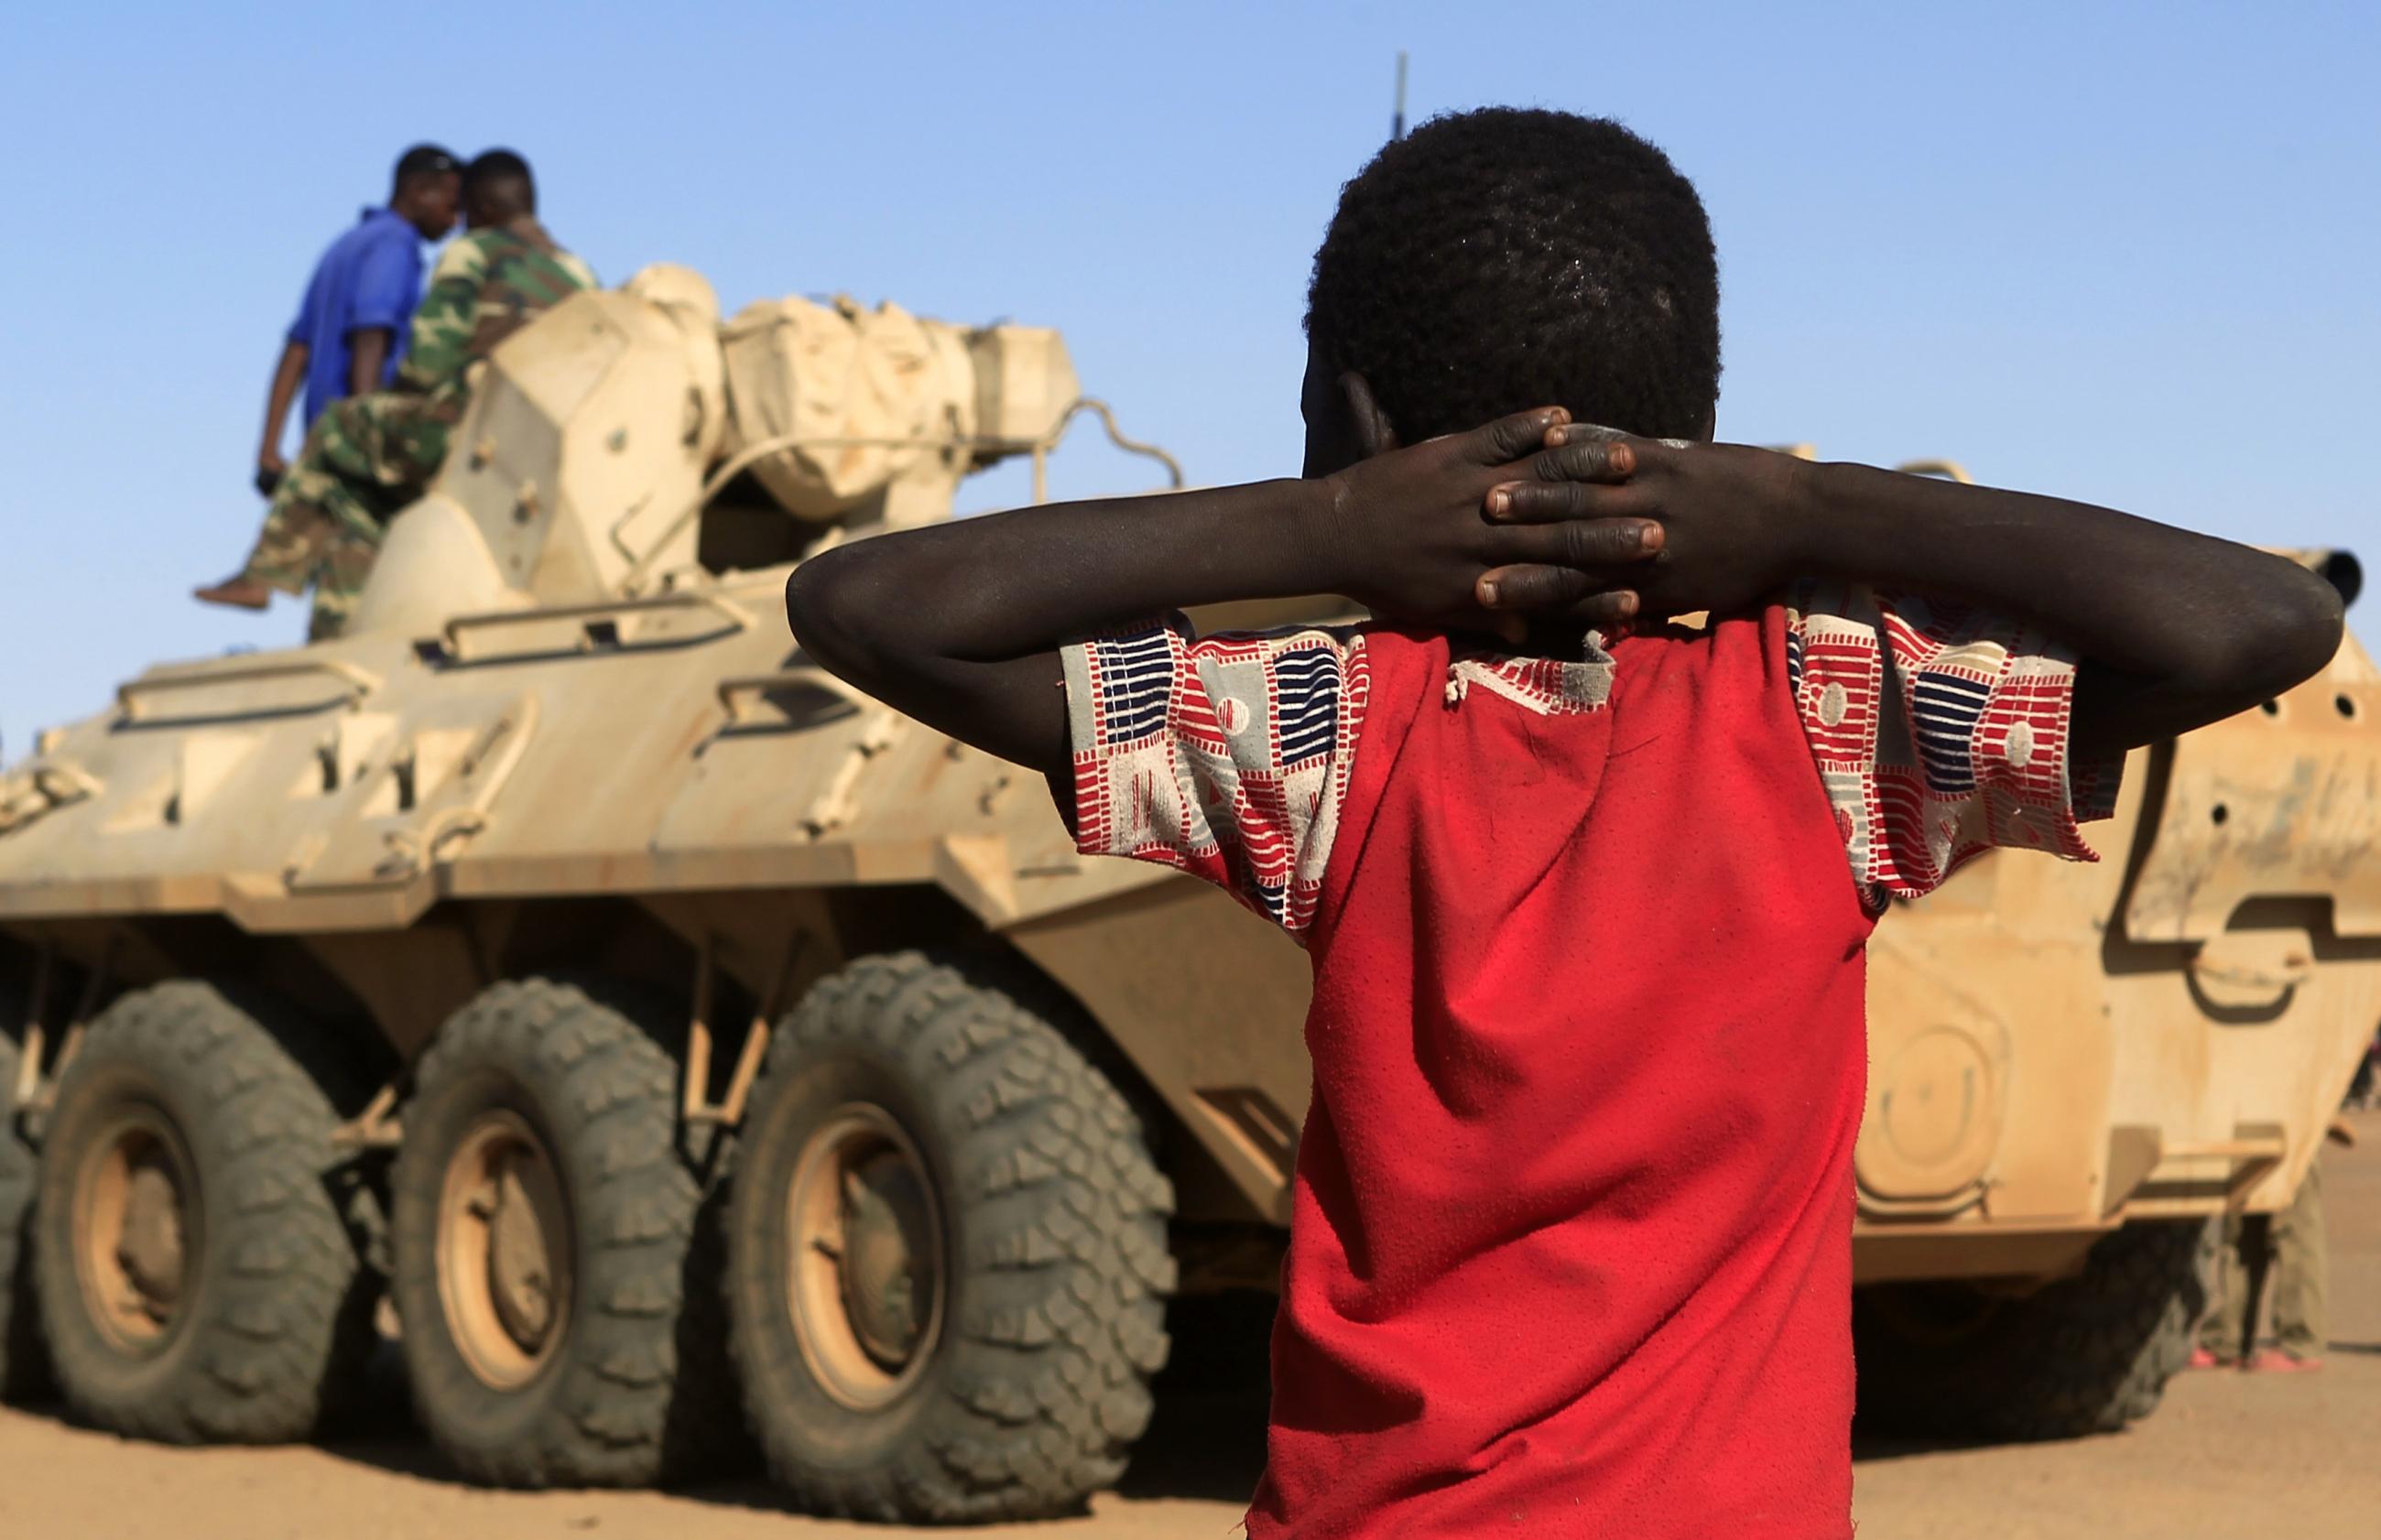 A boy looks on as a military convoy of government forces accompanying Special Prosecutor for Crimes in Darfur, arrives in Tabit village, in North Darfur, Sudan, on November 20, 2014.